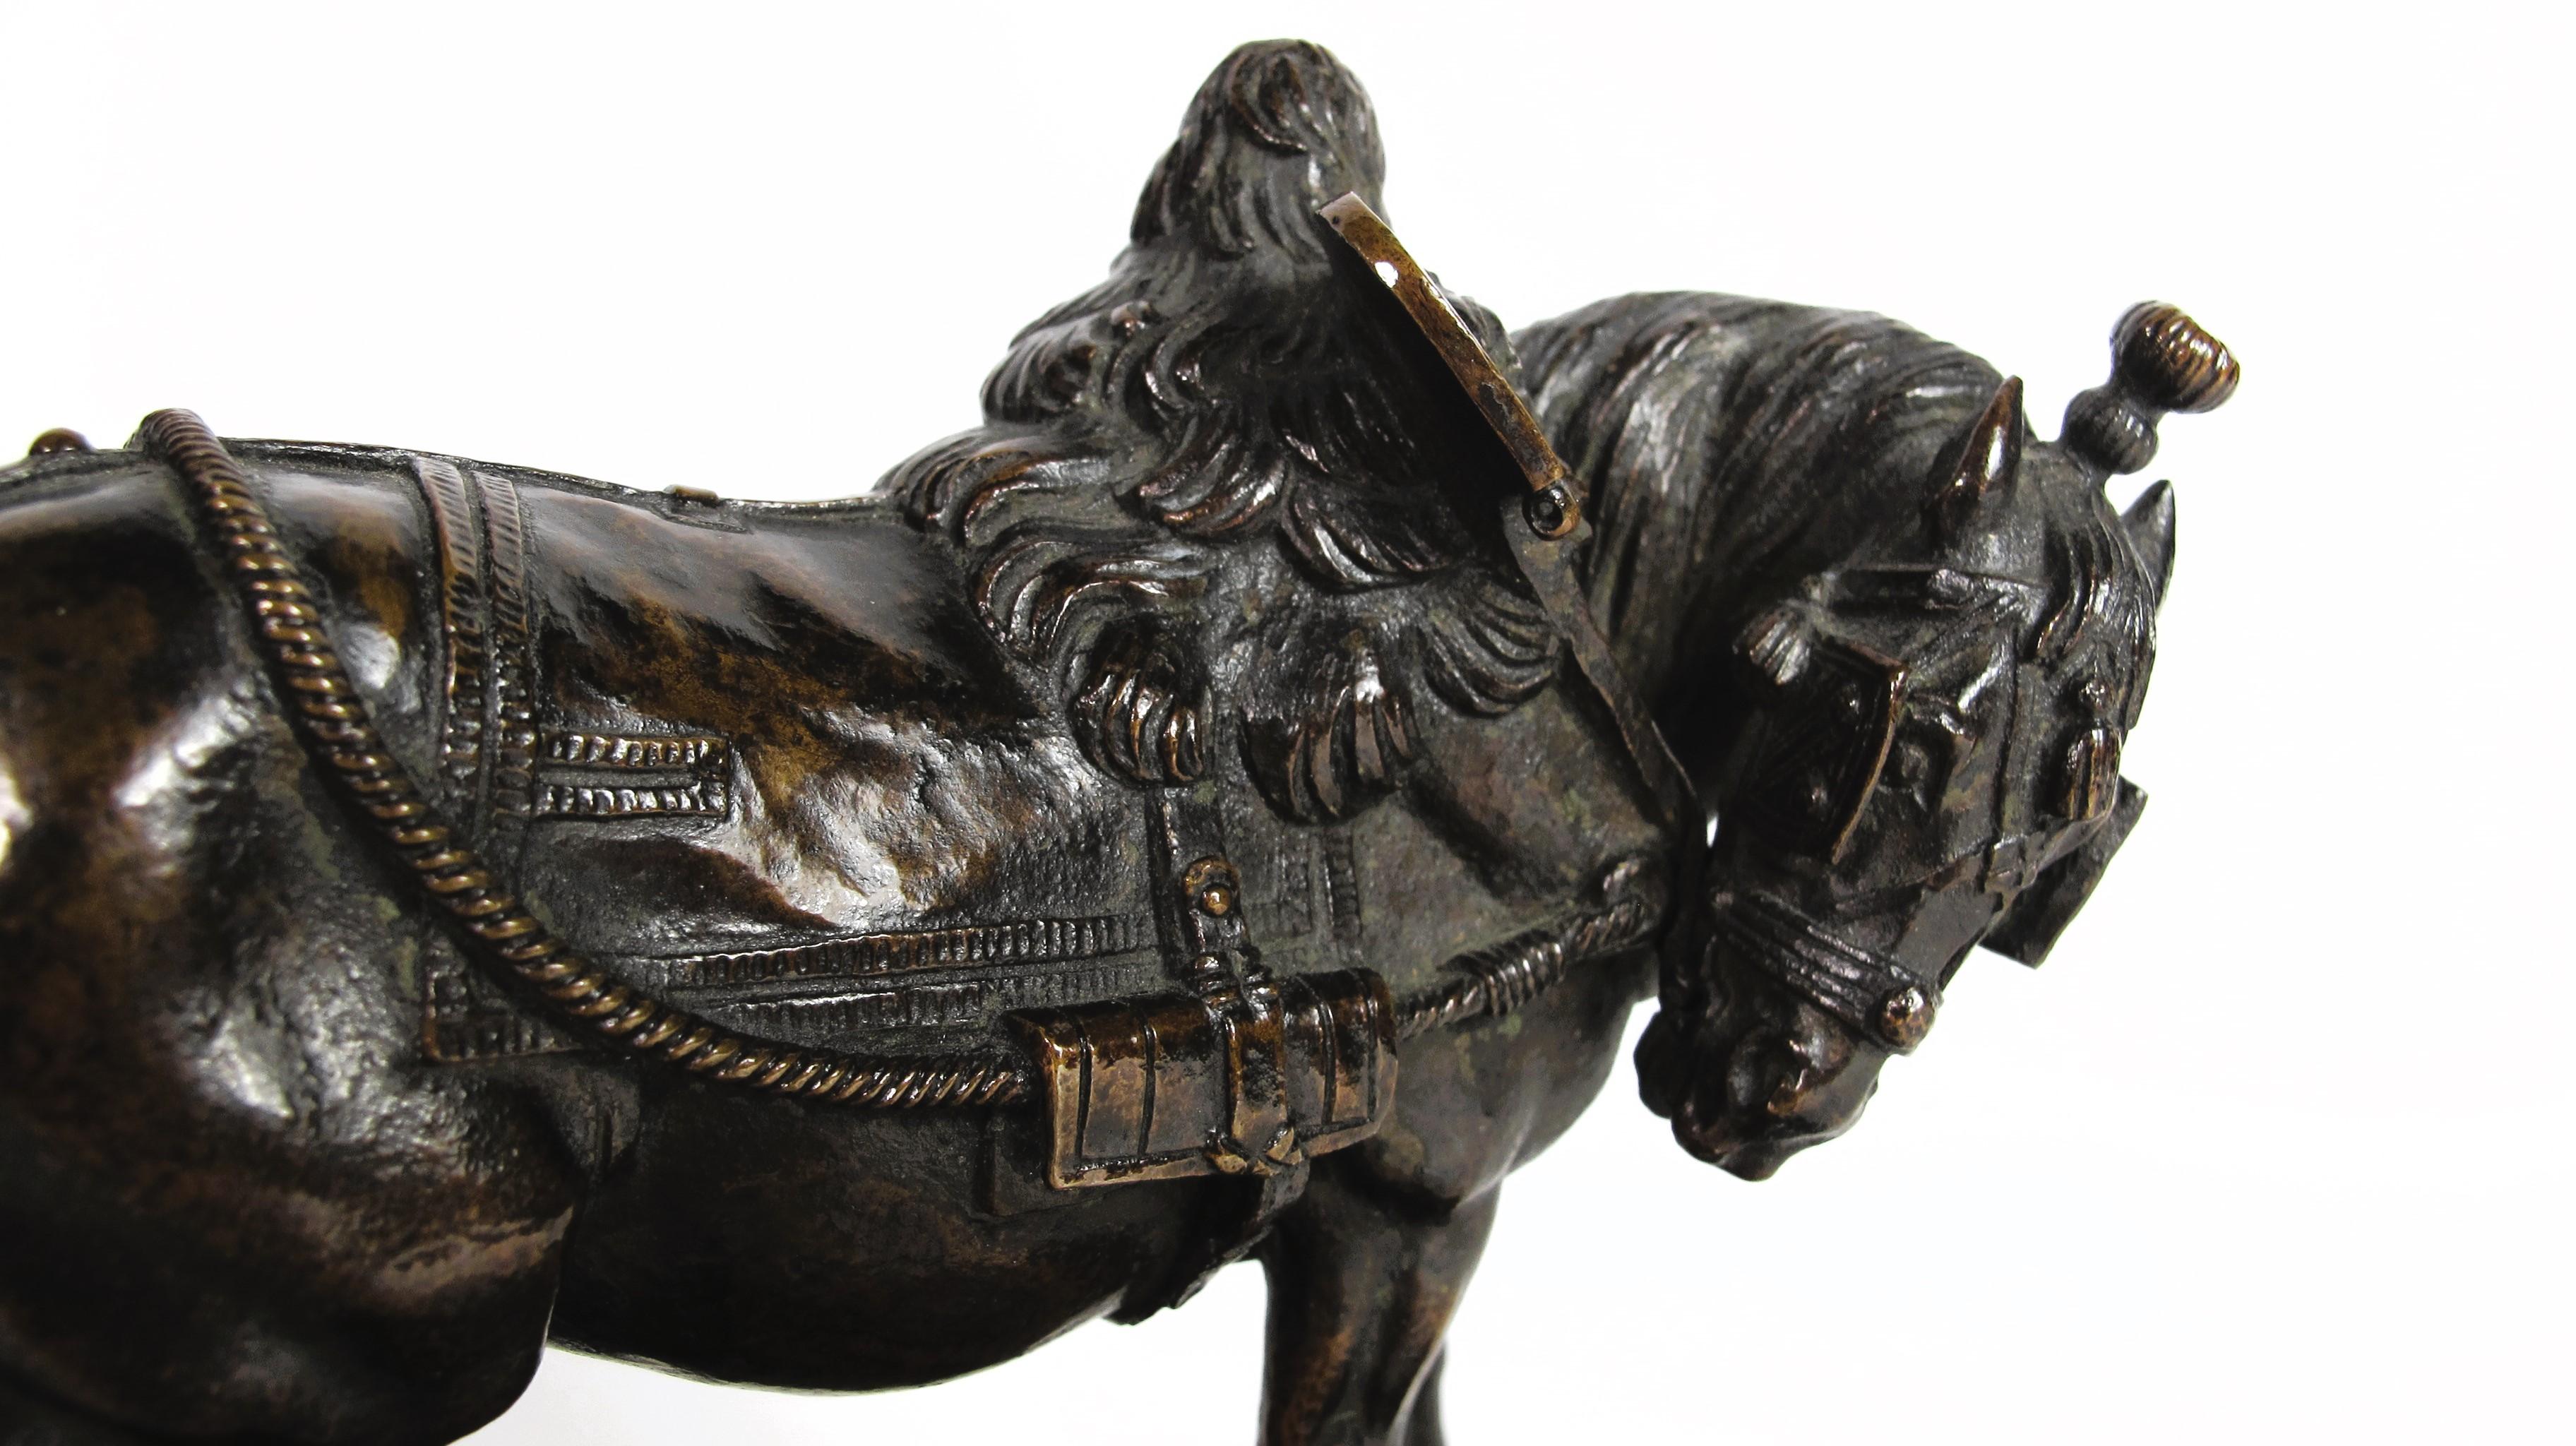 Old bronze proof made according to the sand casting method, brown patina, representing a harnassed workhorse. Signed T.Gechter on base and dated 1842. Bronze sculpture with an equestrian theme, very fine quality., detailed chasing, lot of details